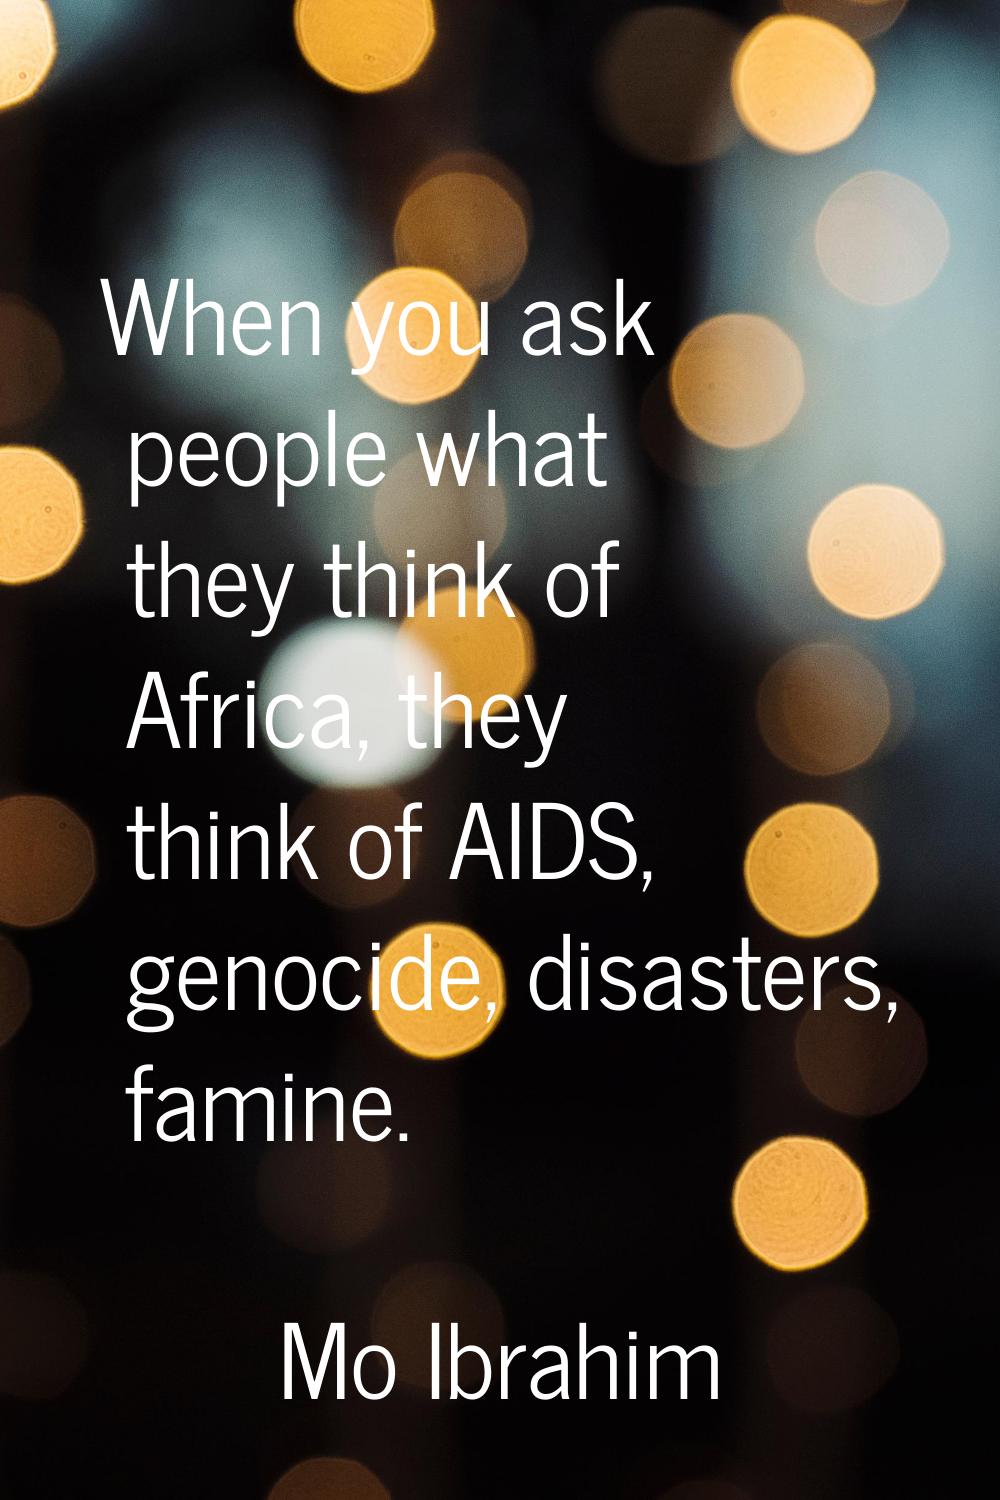 When you ask people what they think of Africa, they think of AIDS, genocide, disasters, famine.